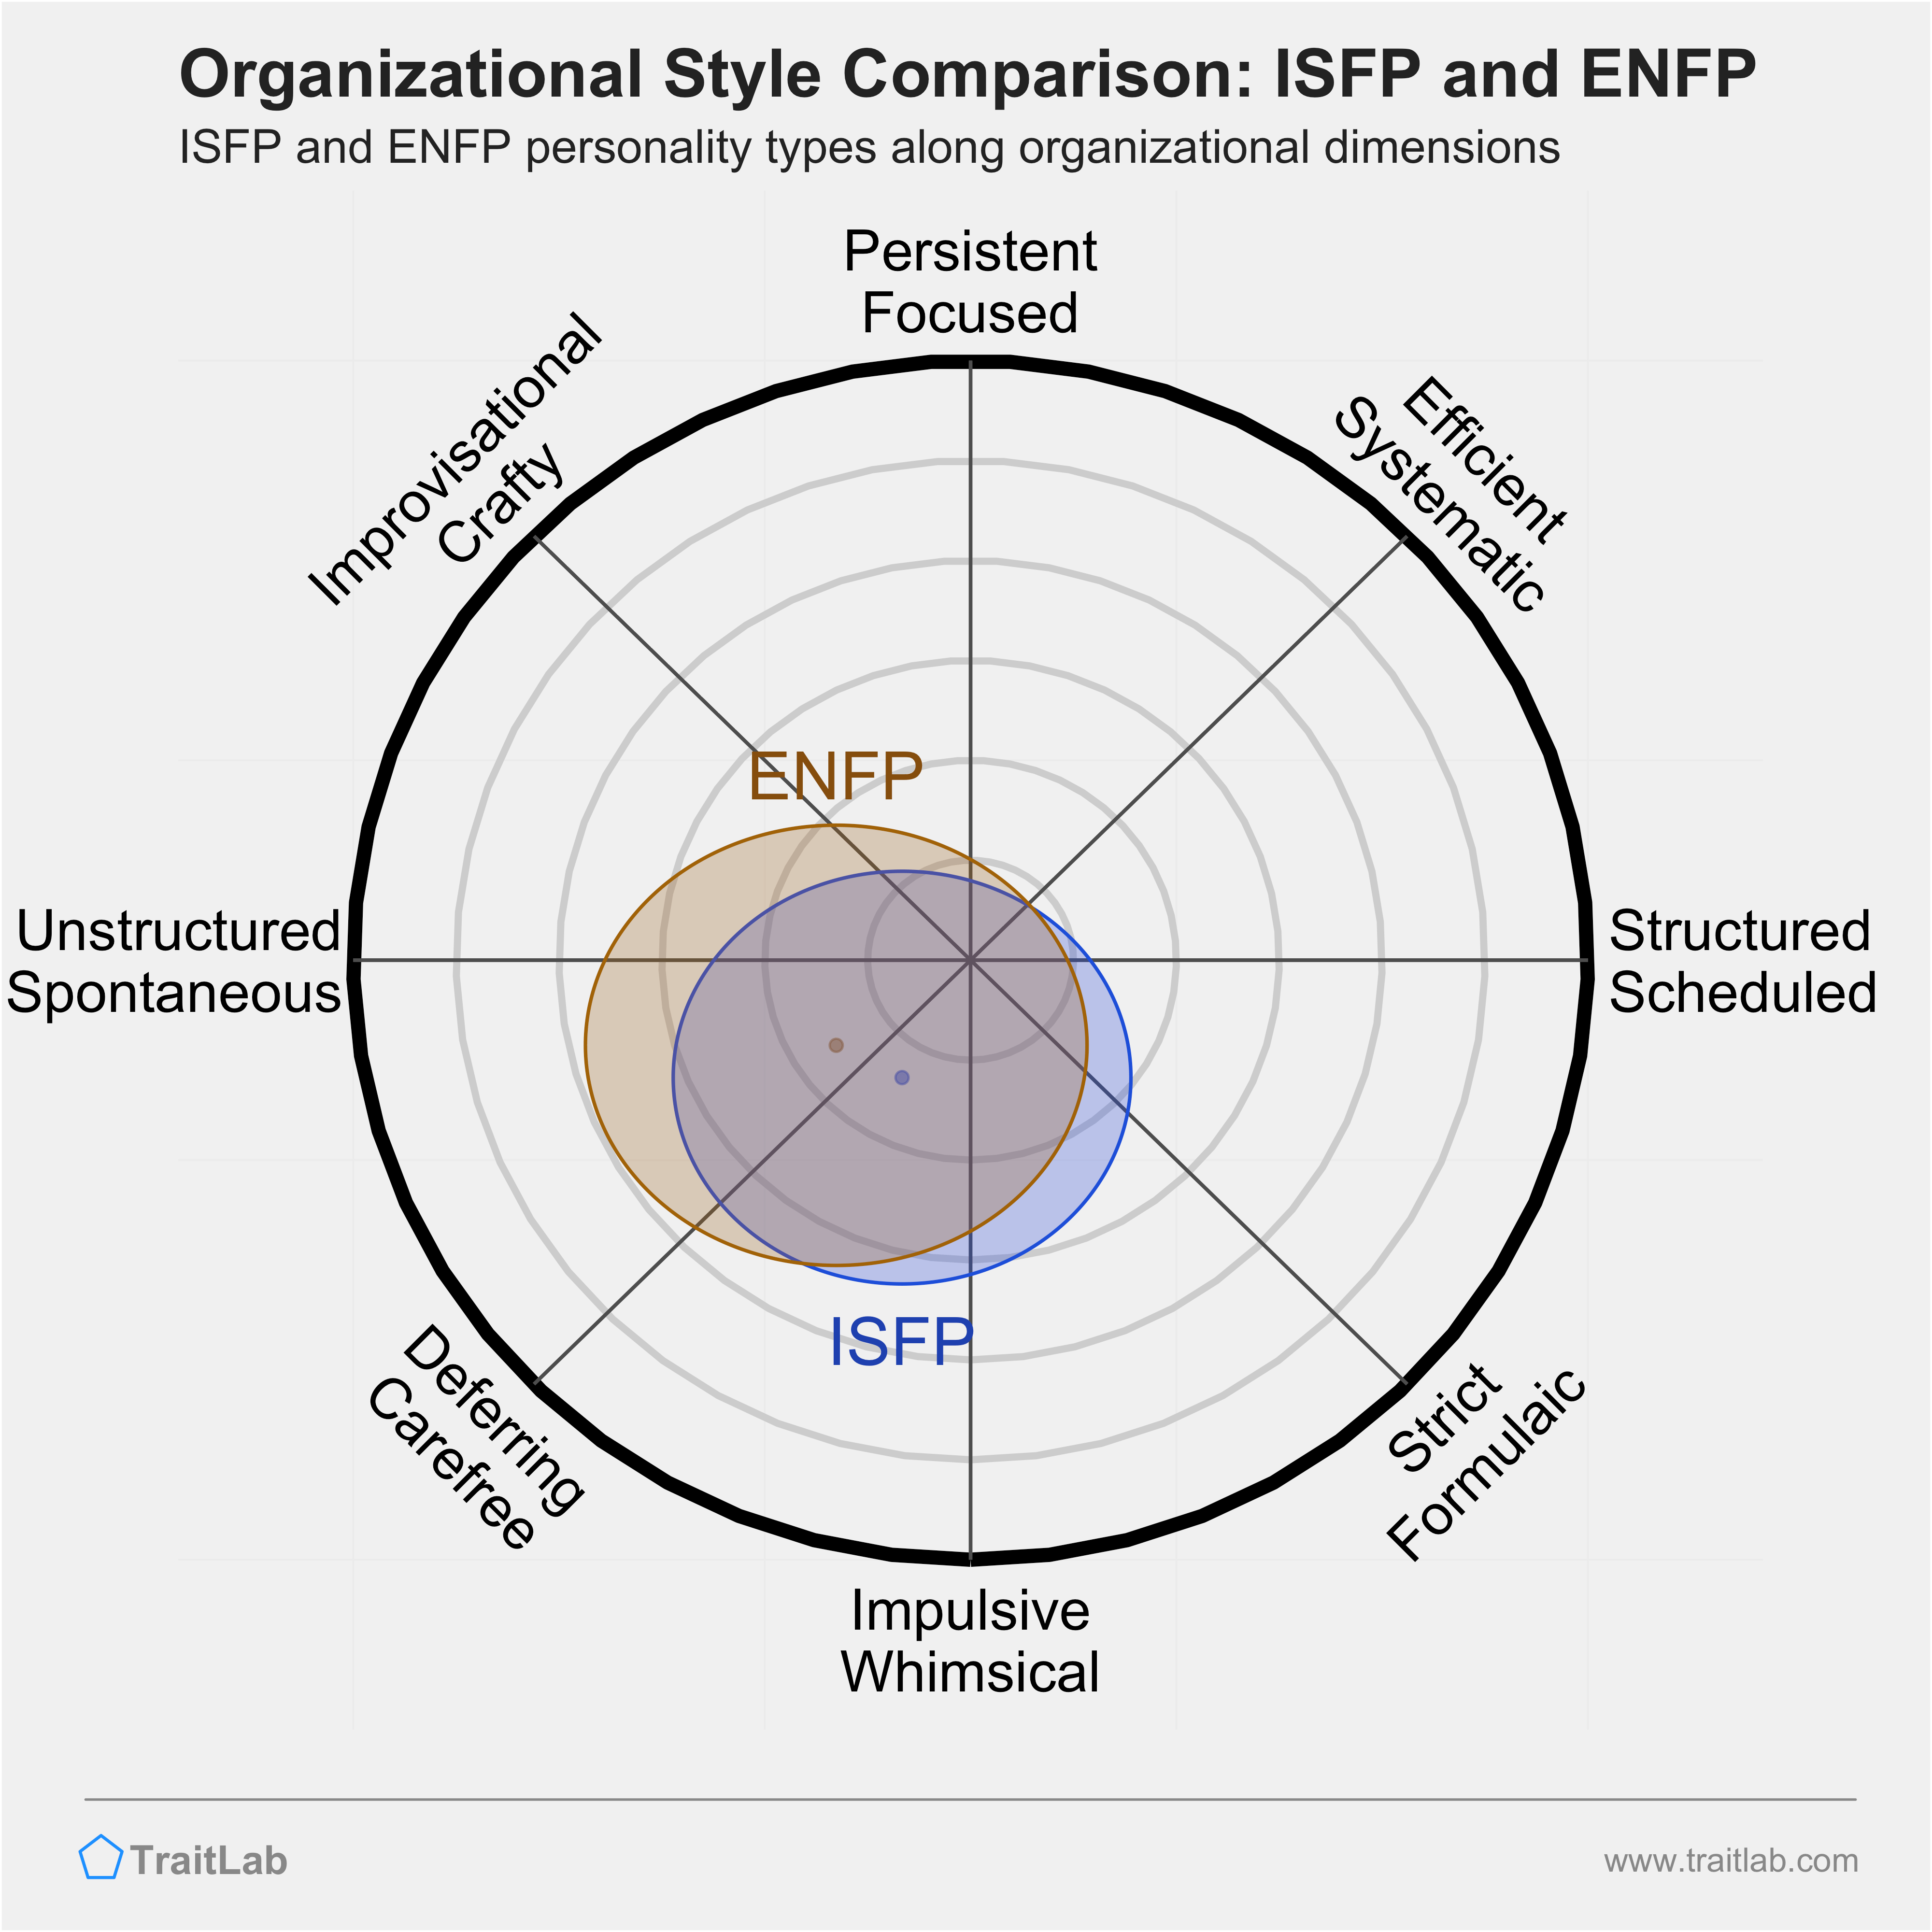 ISFP and ENFP comparison across organizational dimensions